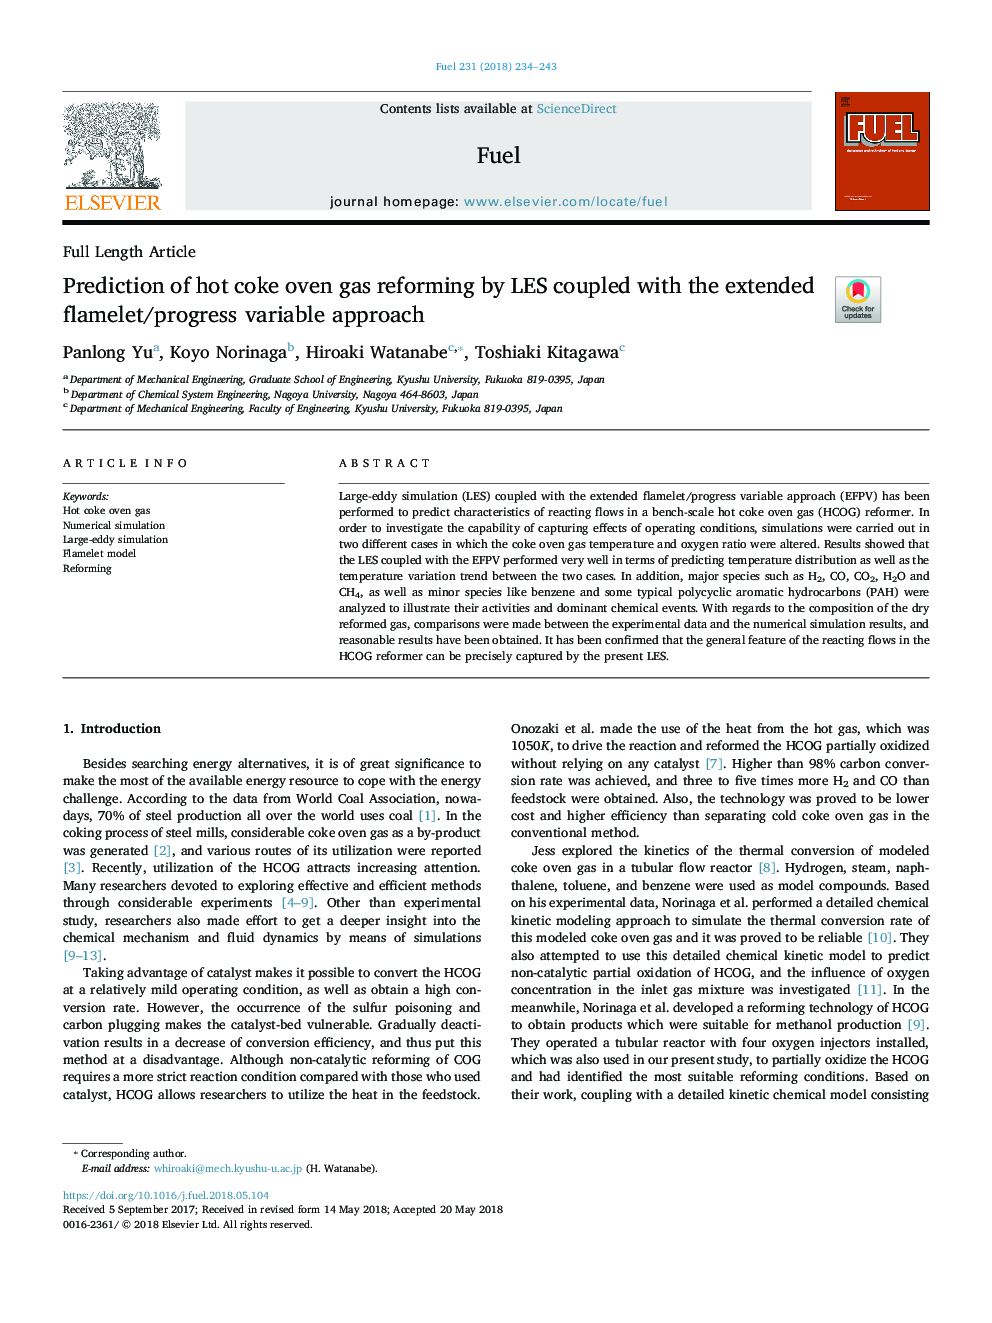 Prediction of hot coke oven gas reforming by LES coupled with the extended flamelet/progress variable approach